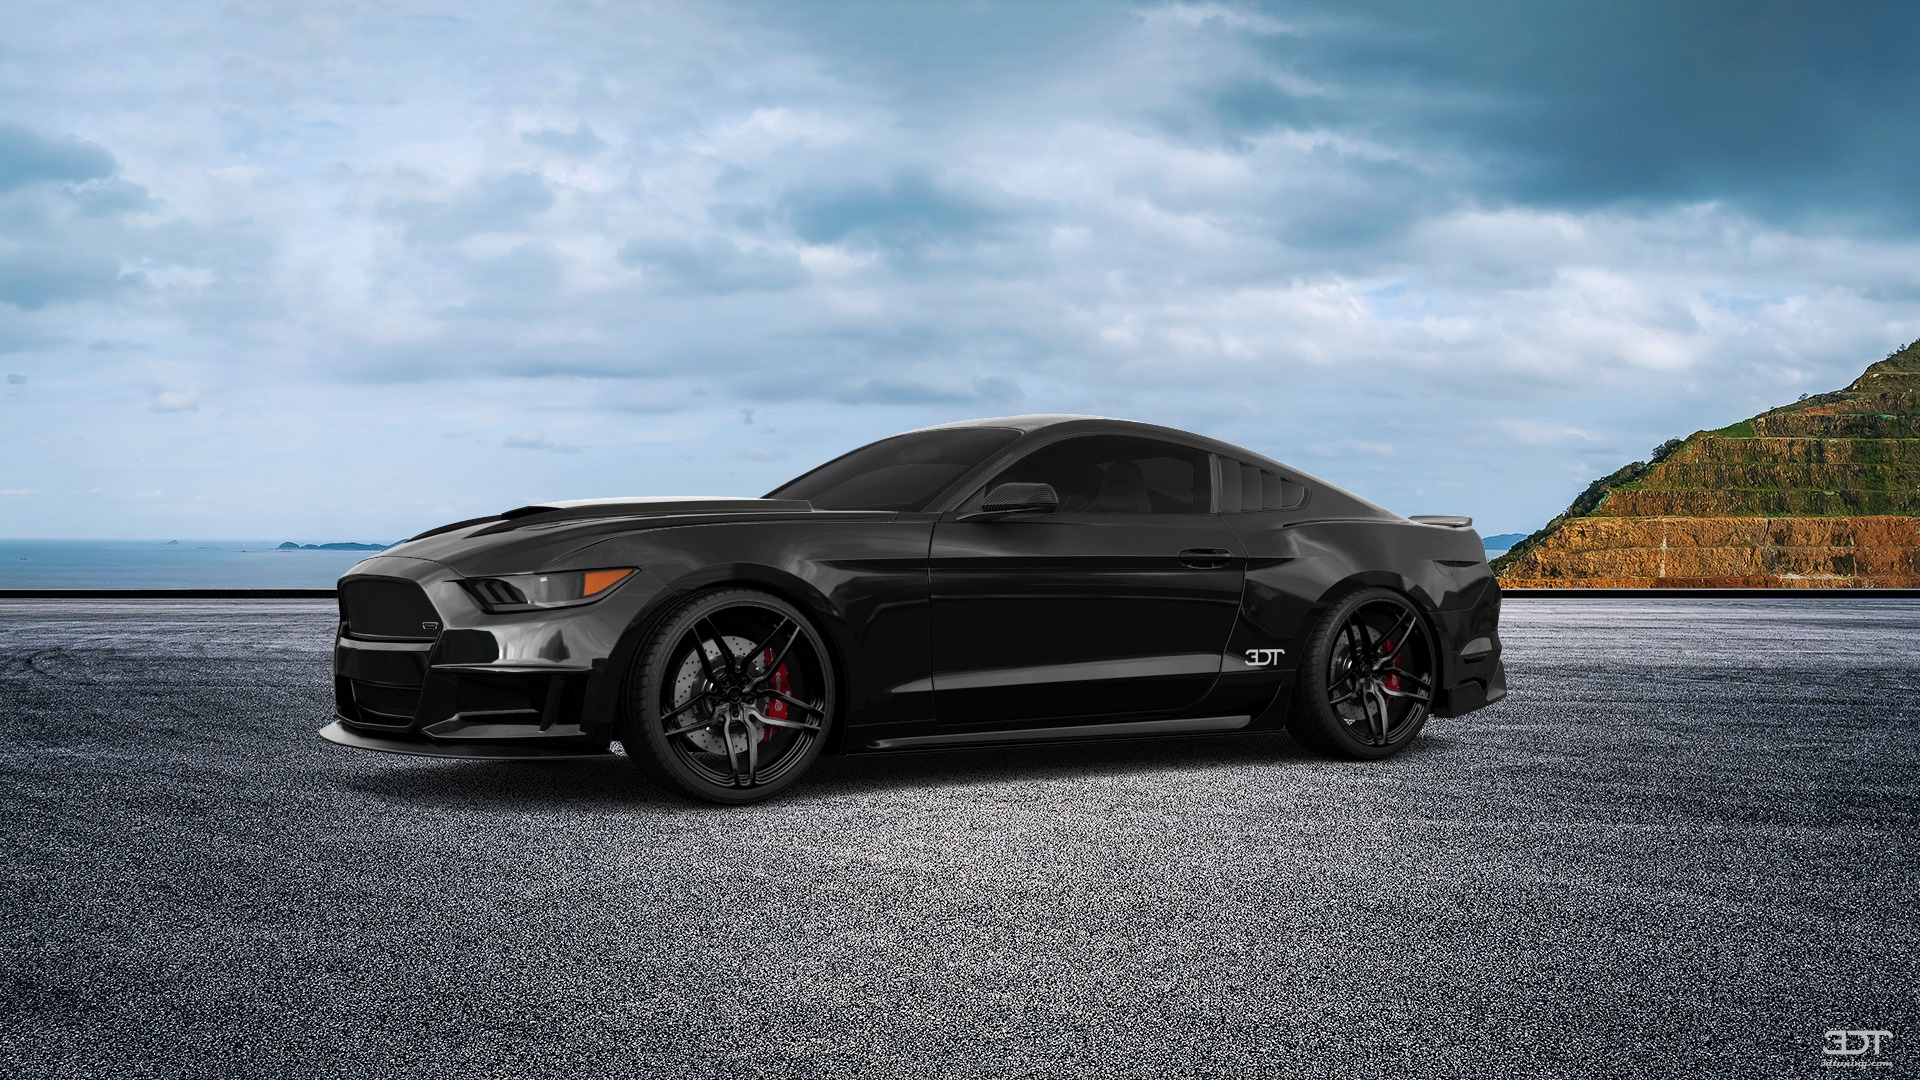 Ford Mustang 2 Door Coupe 2015